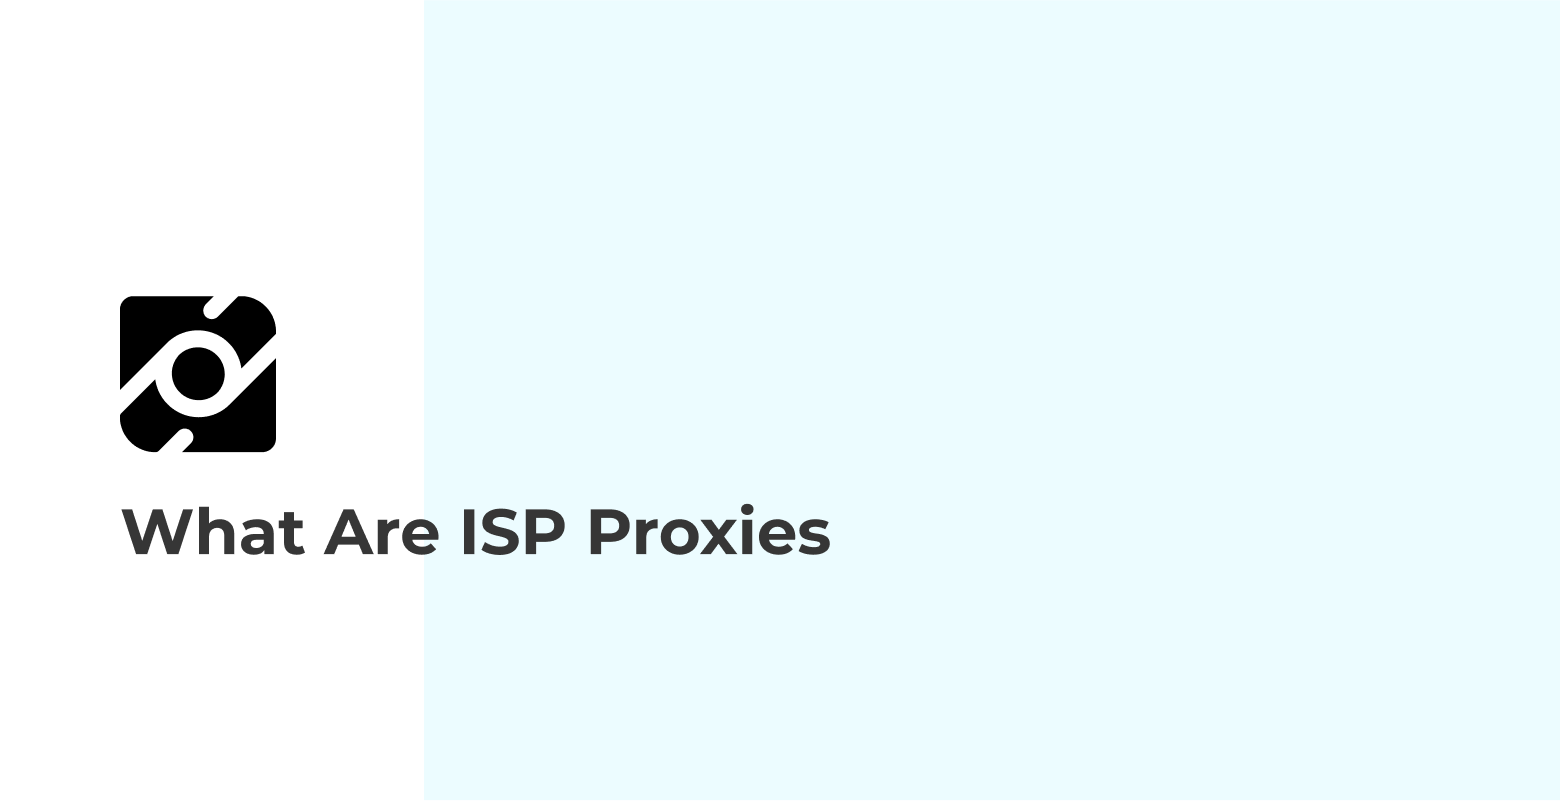 What Are ISP Proxies